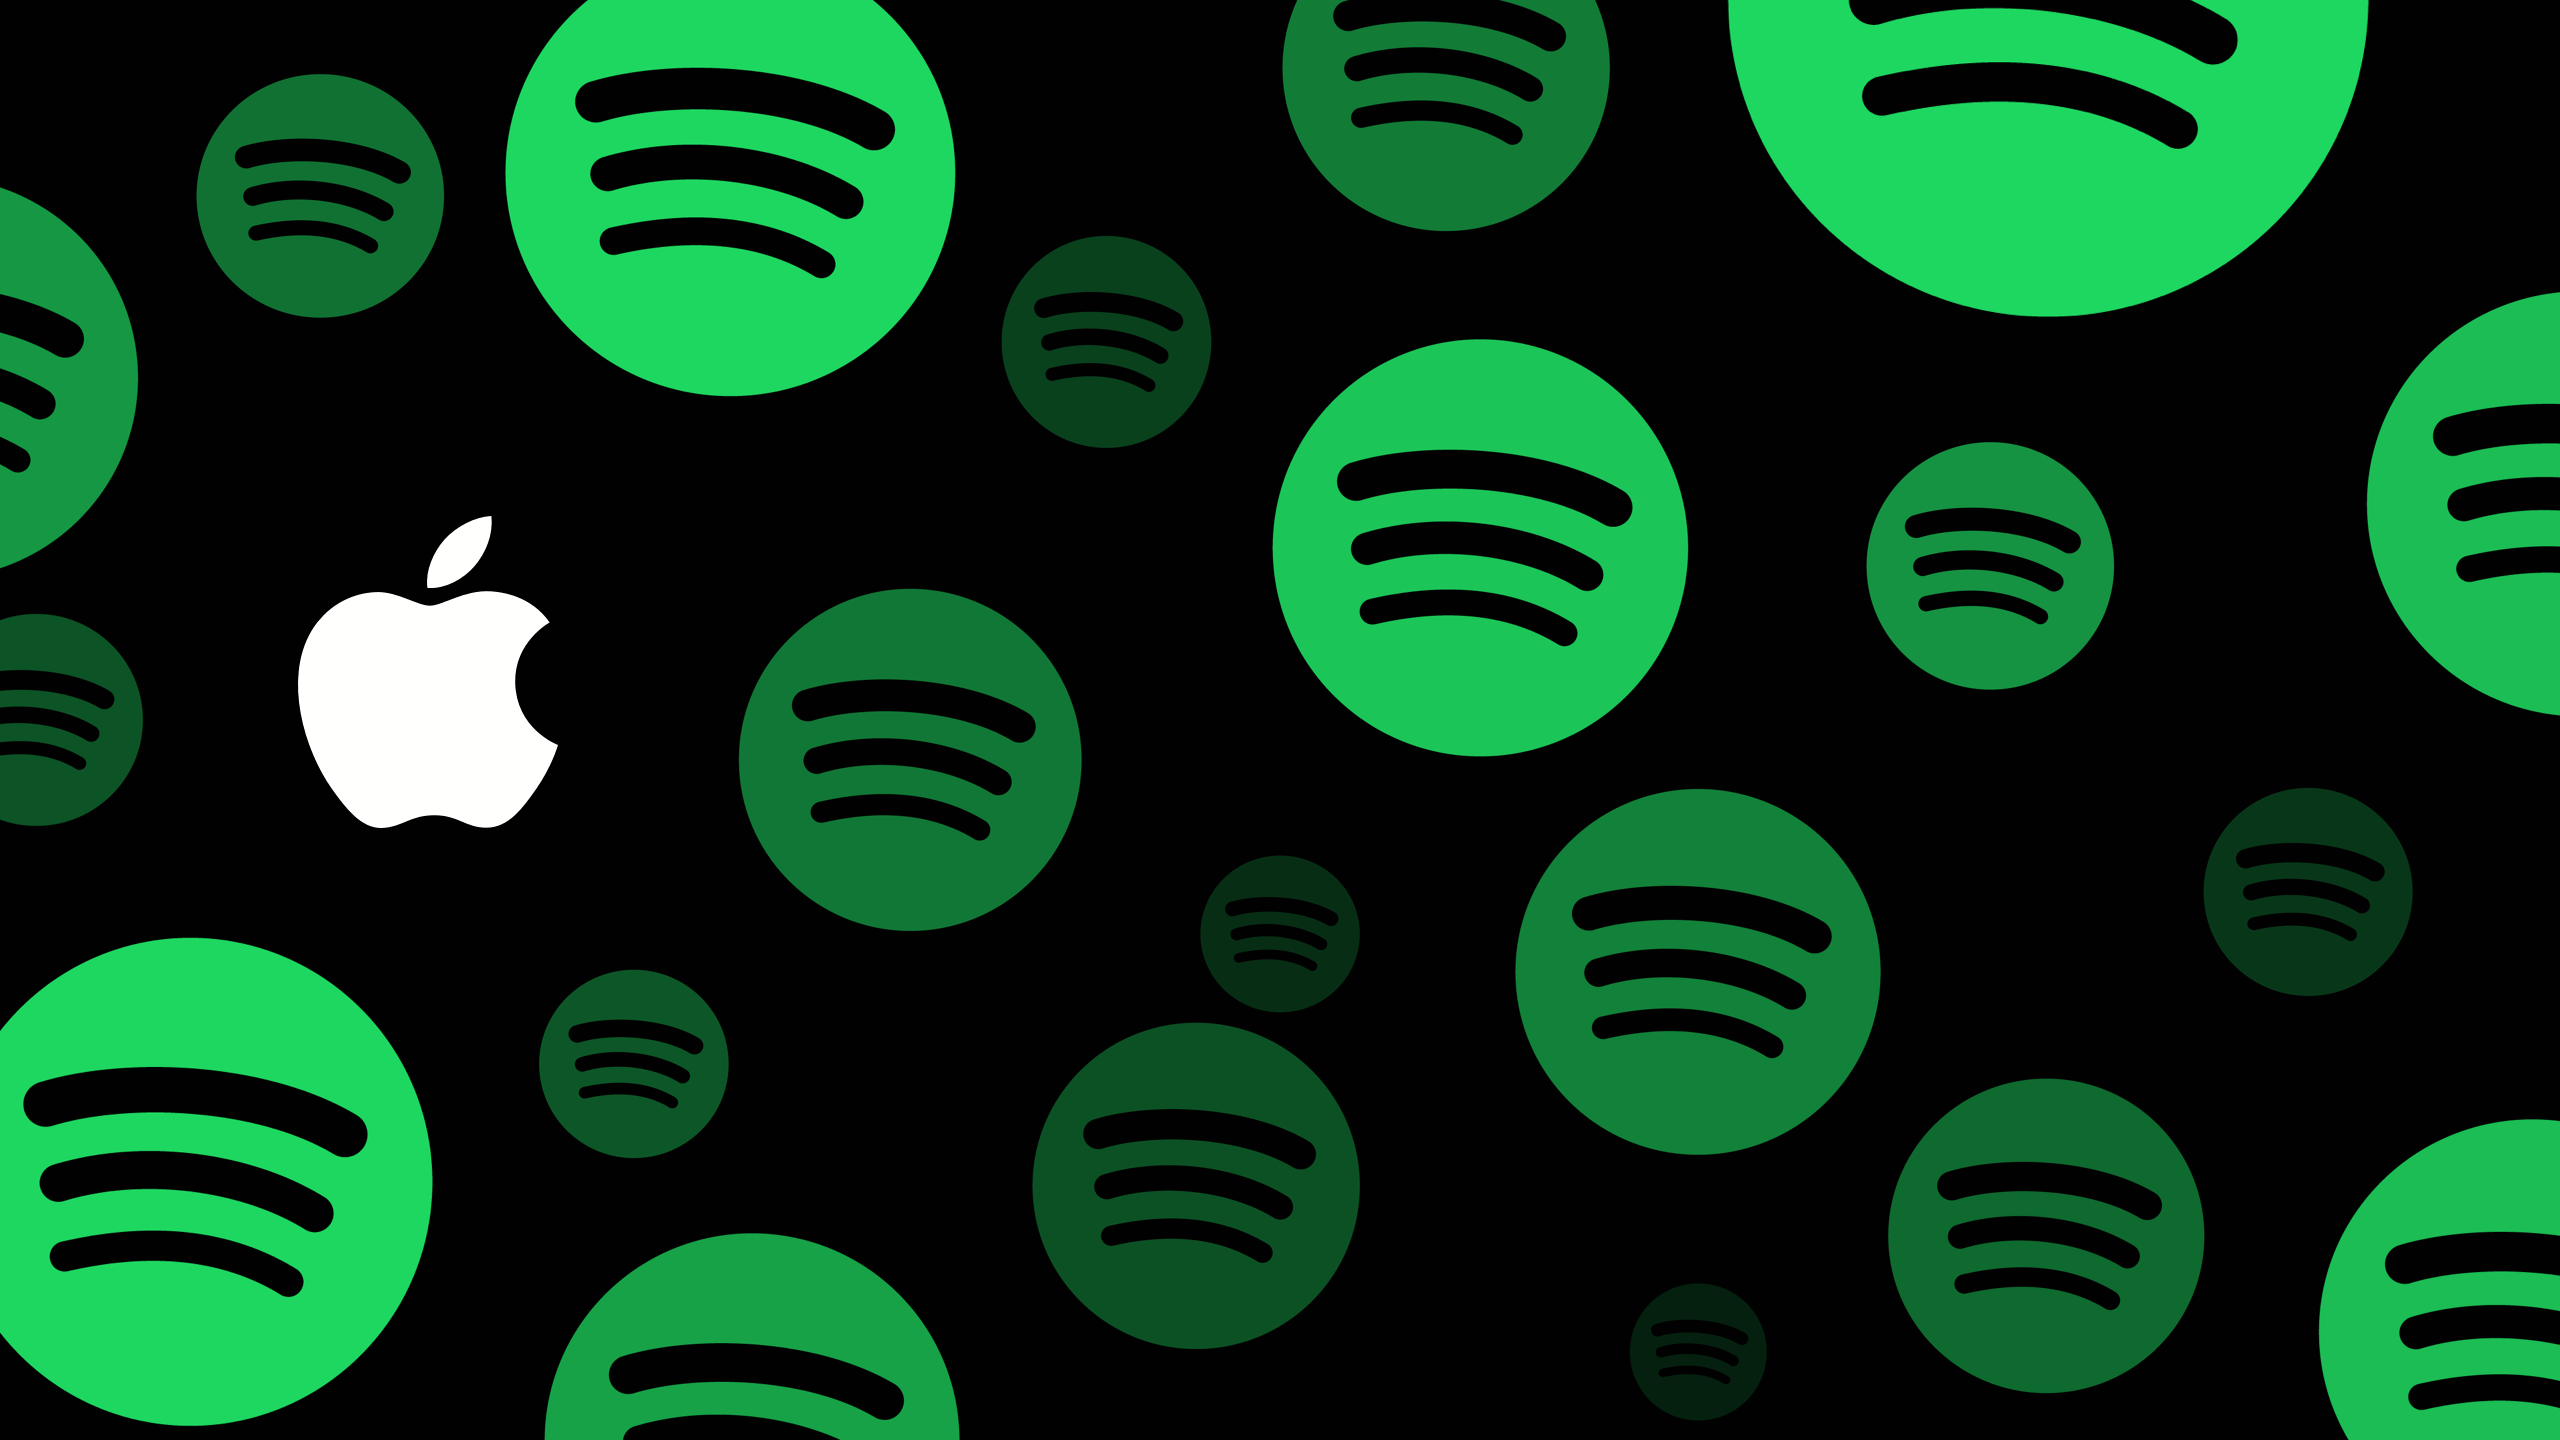 Spotify vs Apple: How Spotify is betting $230M on podcasts to win over Apple users (Ep. 2) Case Study Tile